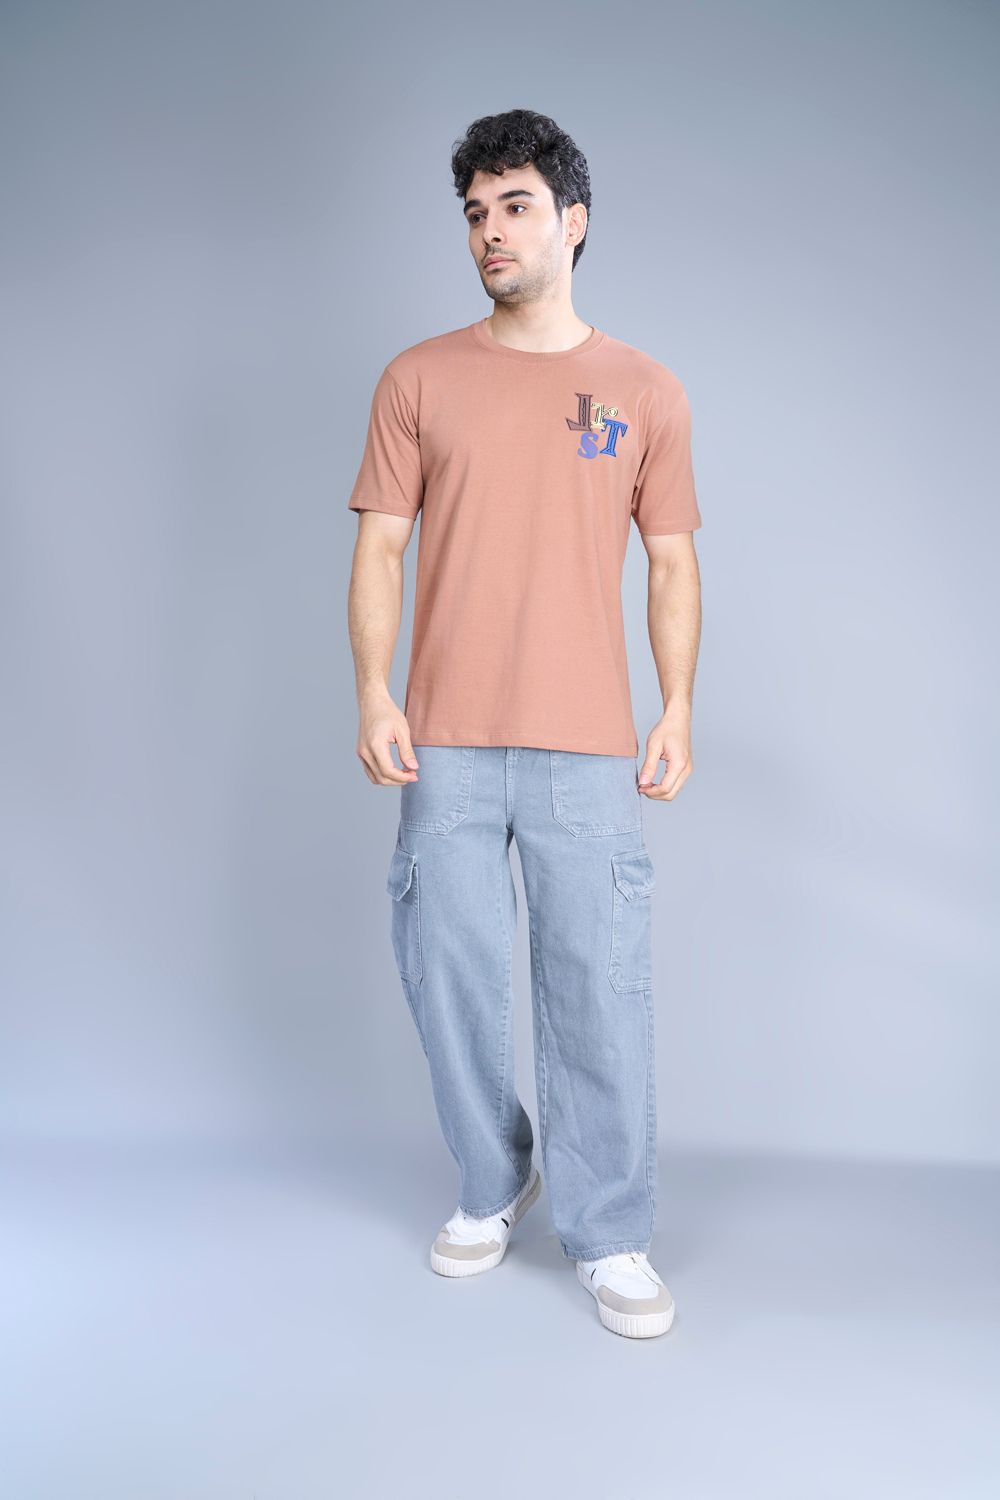 Cotton oversized T shirt for men in the solid color Café cream with half sleeves and crew neck, front view.